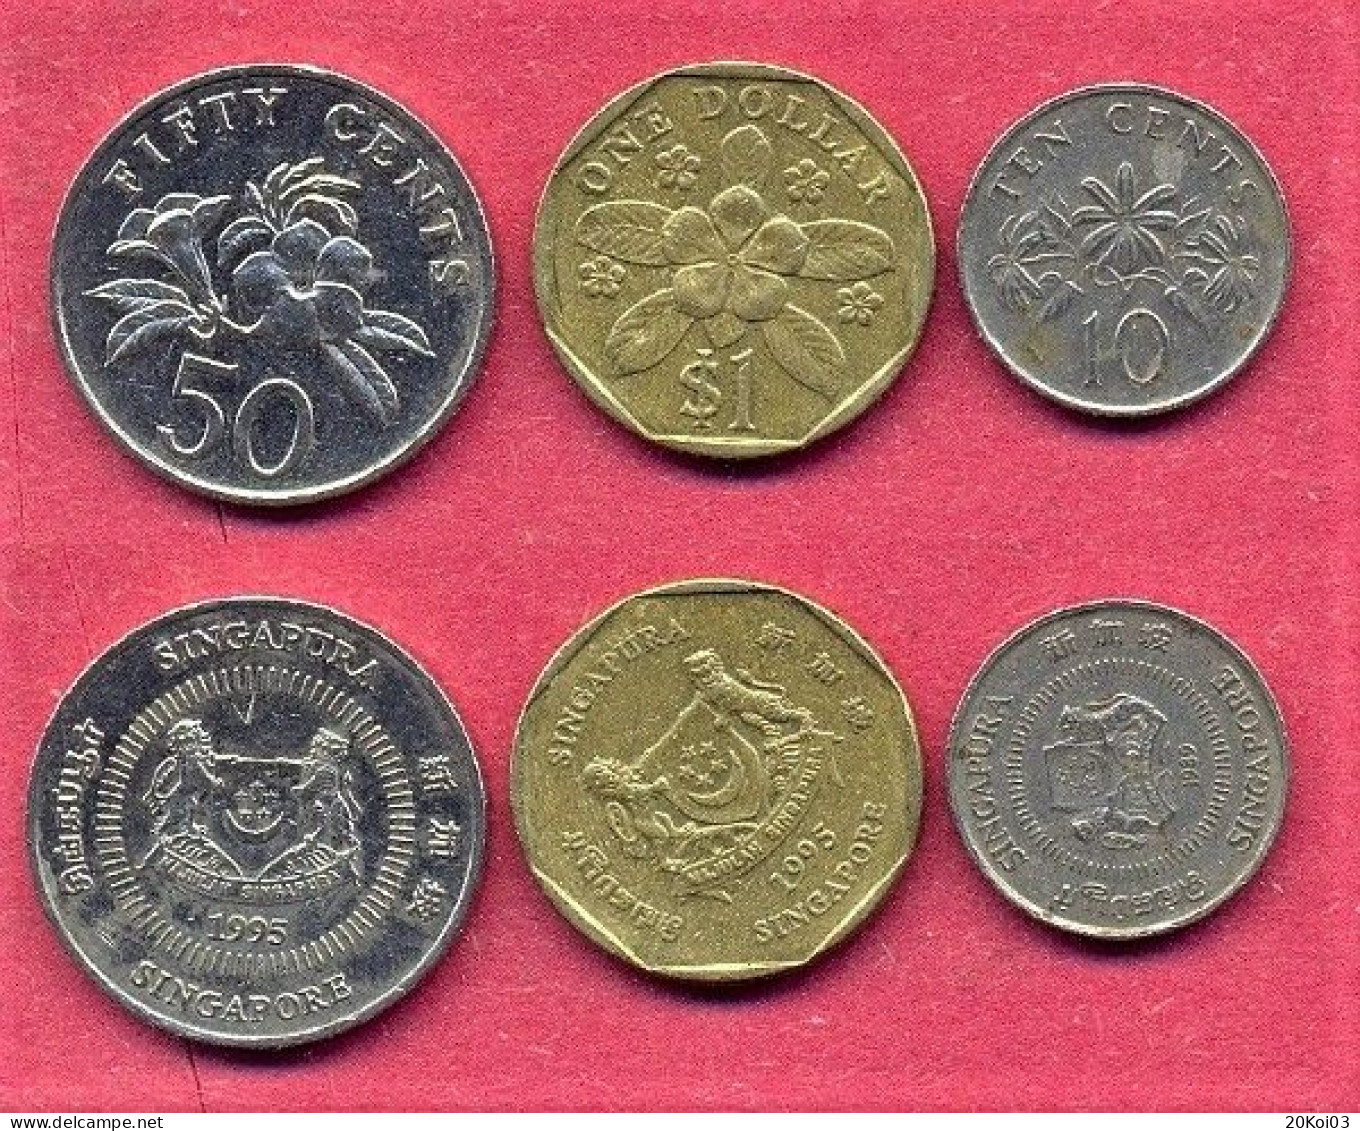 Singapore Coins Coin Set 1 Dollar 1995, Fifty 50 Cents 1995, 10 Cents 1989 Singapore - Singapore